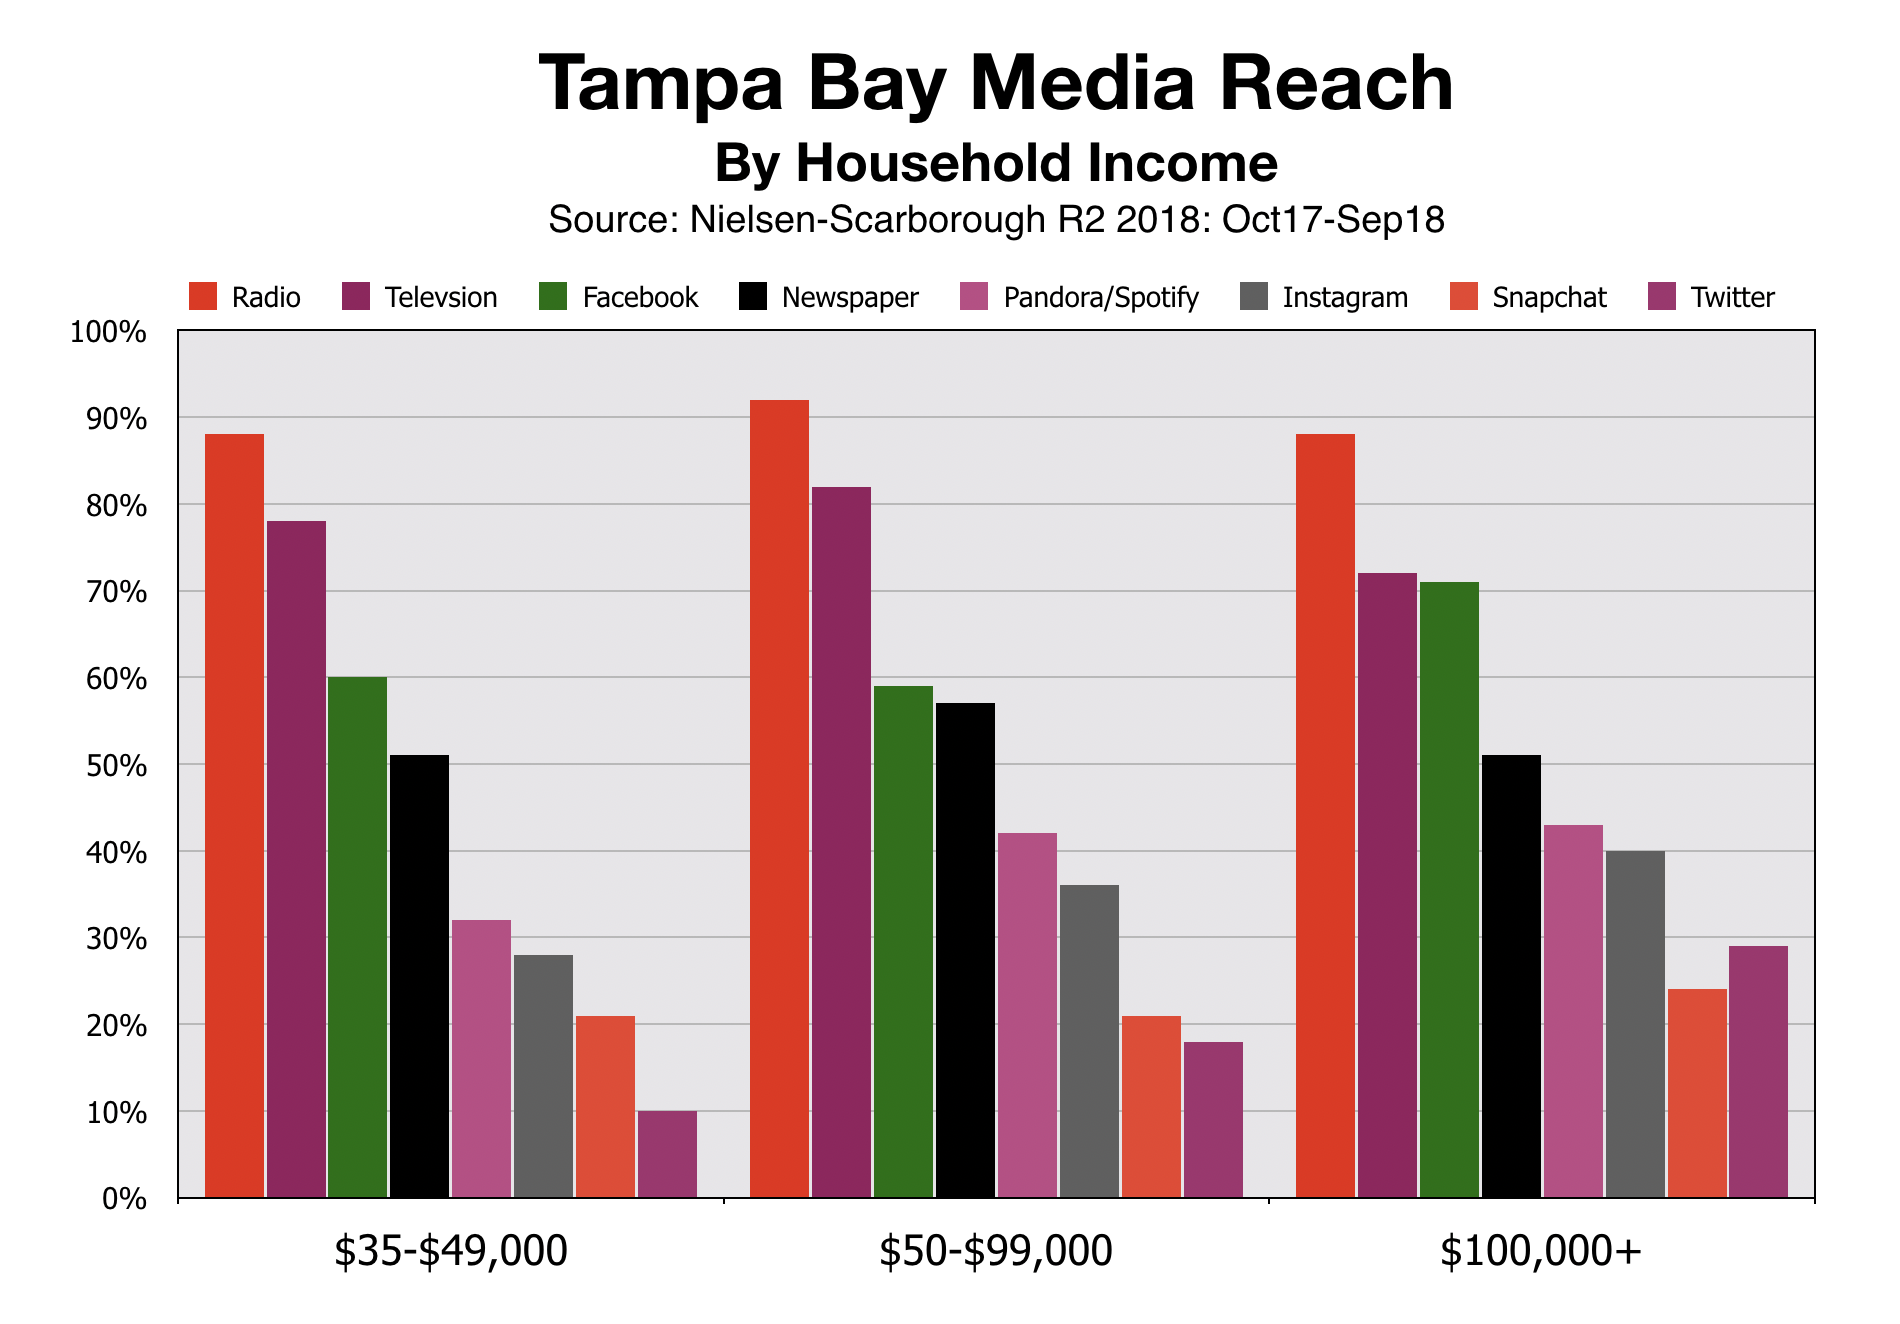 Tampa Bay Media Reach By Income